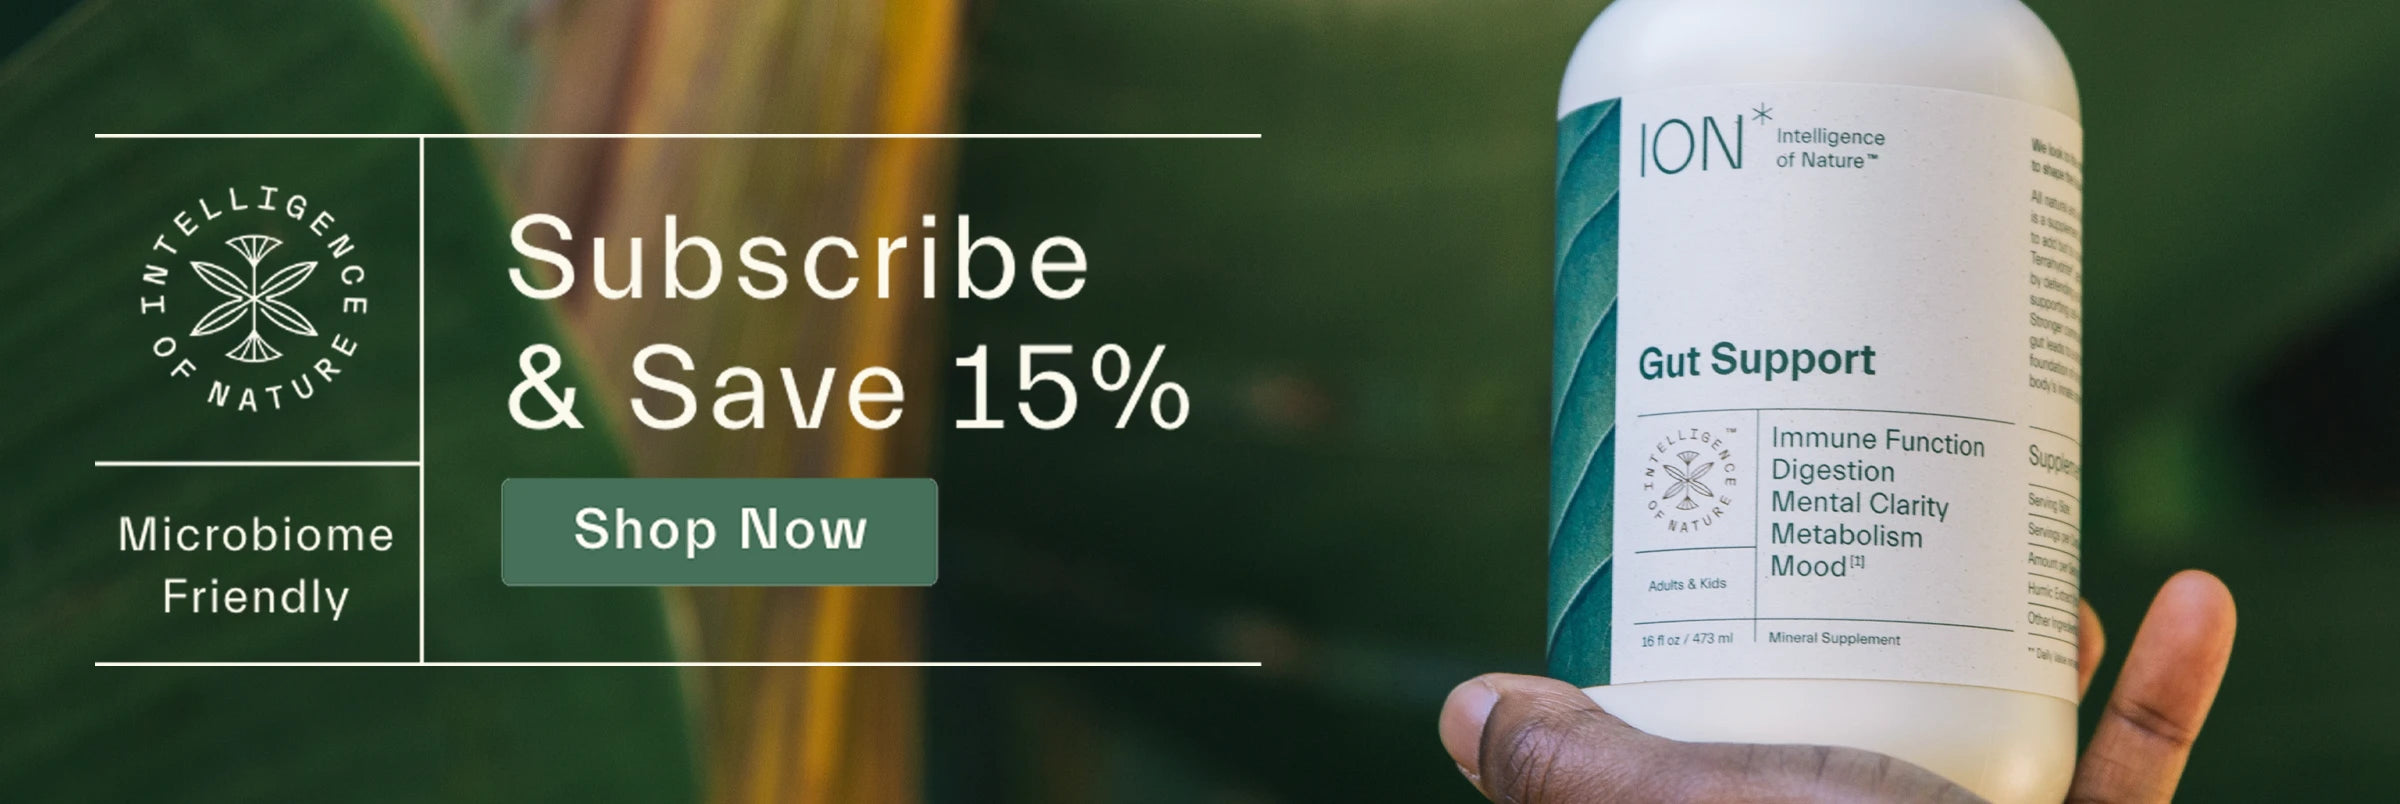 Subscribe and Save 15% on ION* Products